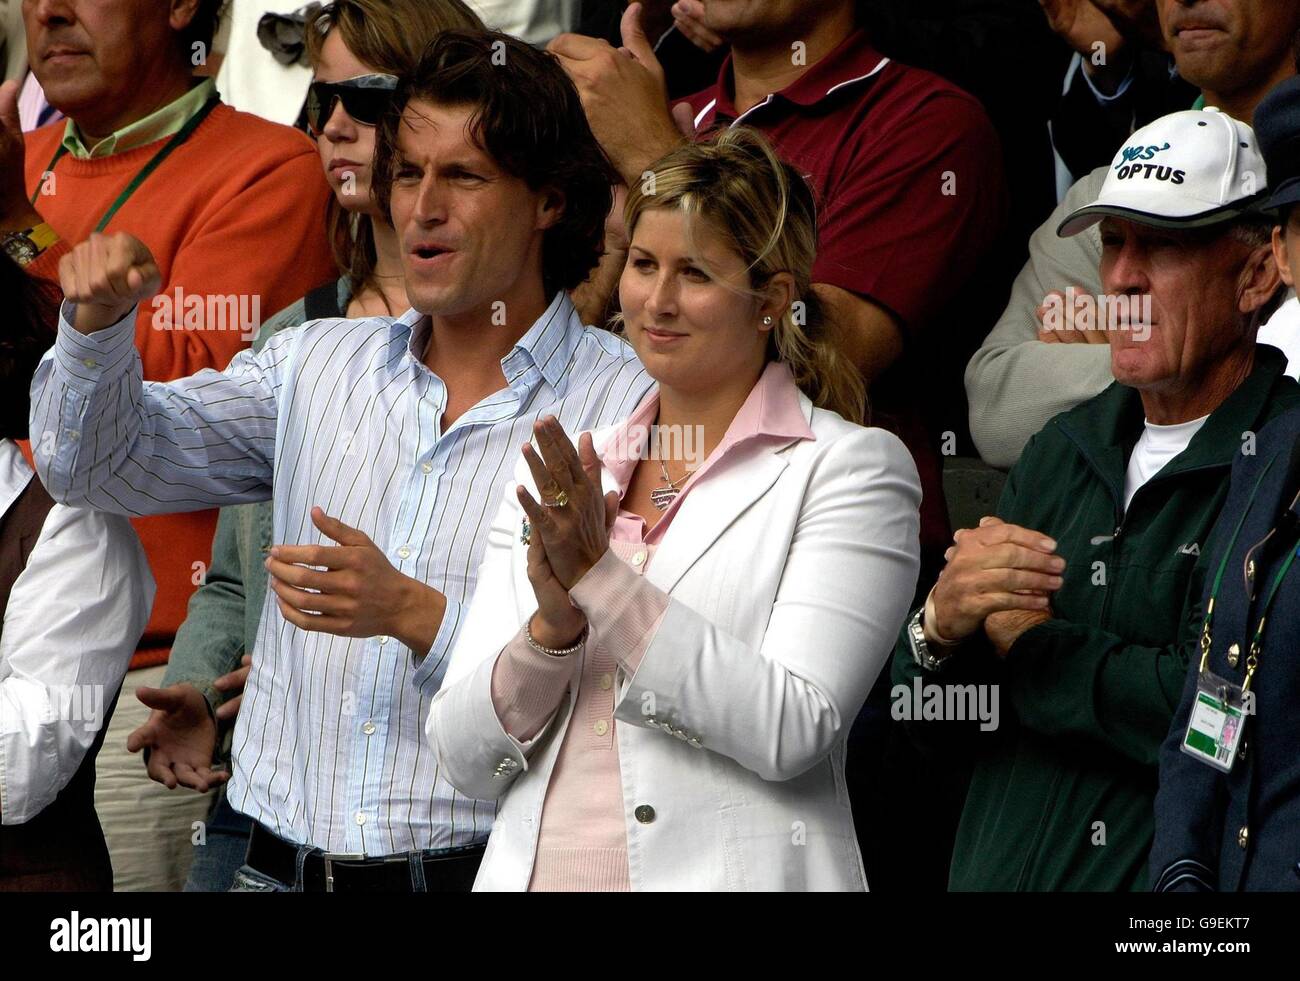 Tennis - Wimbledon Championships 2006 - All England Club - Day Thirteen. Mirka Vavrinec partner of Switzerland's Roger Federer applauds during The All England Lawn Tennis Championships at Wimbledon. Stock Photo